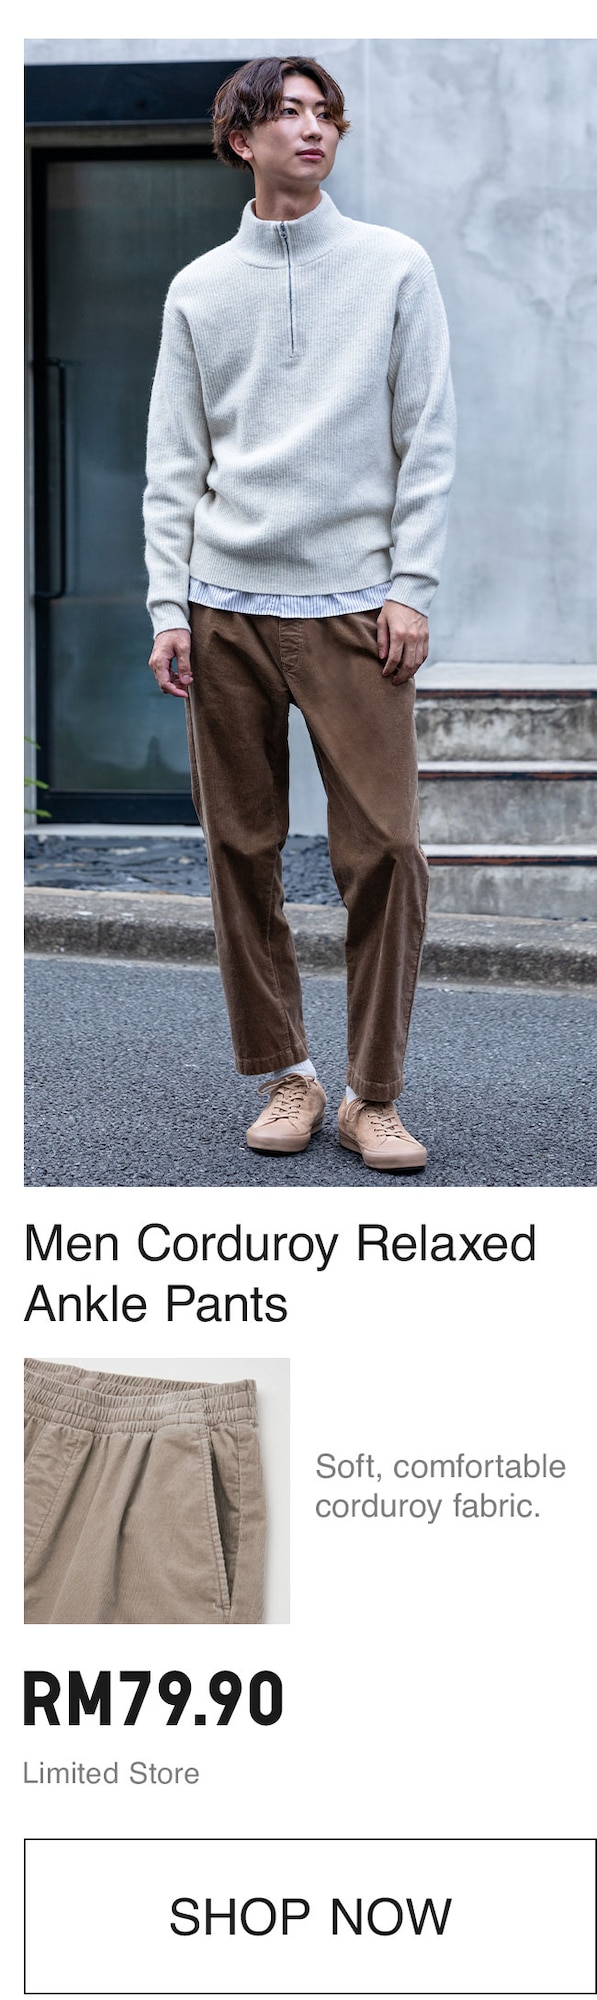 CORDUROY RELAX ANKLE PANTS